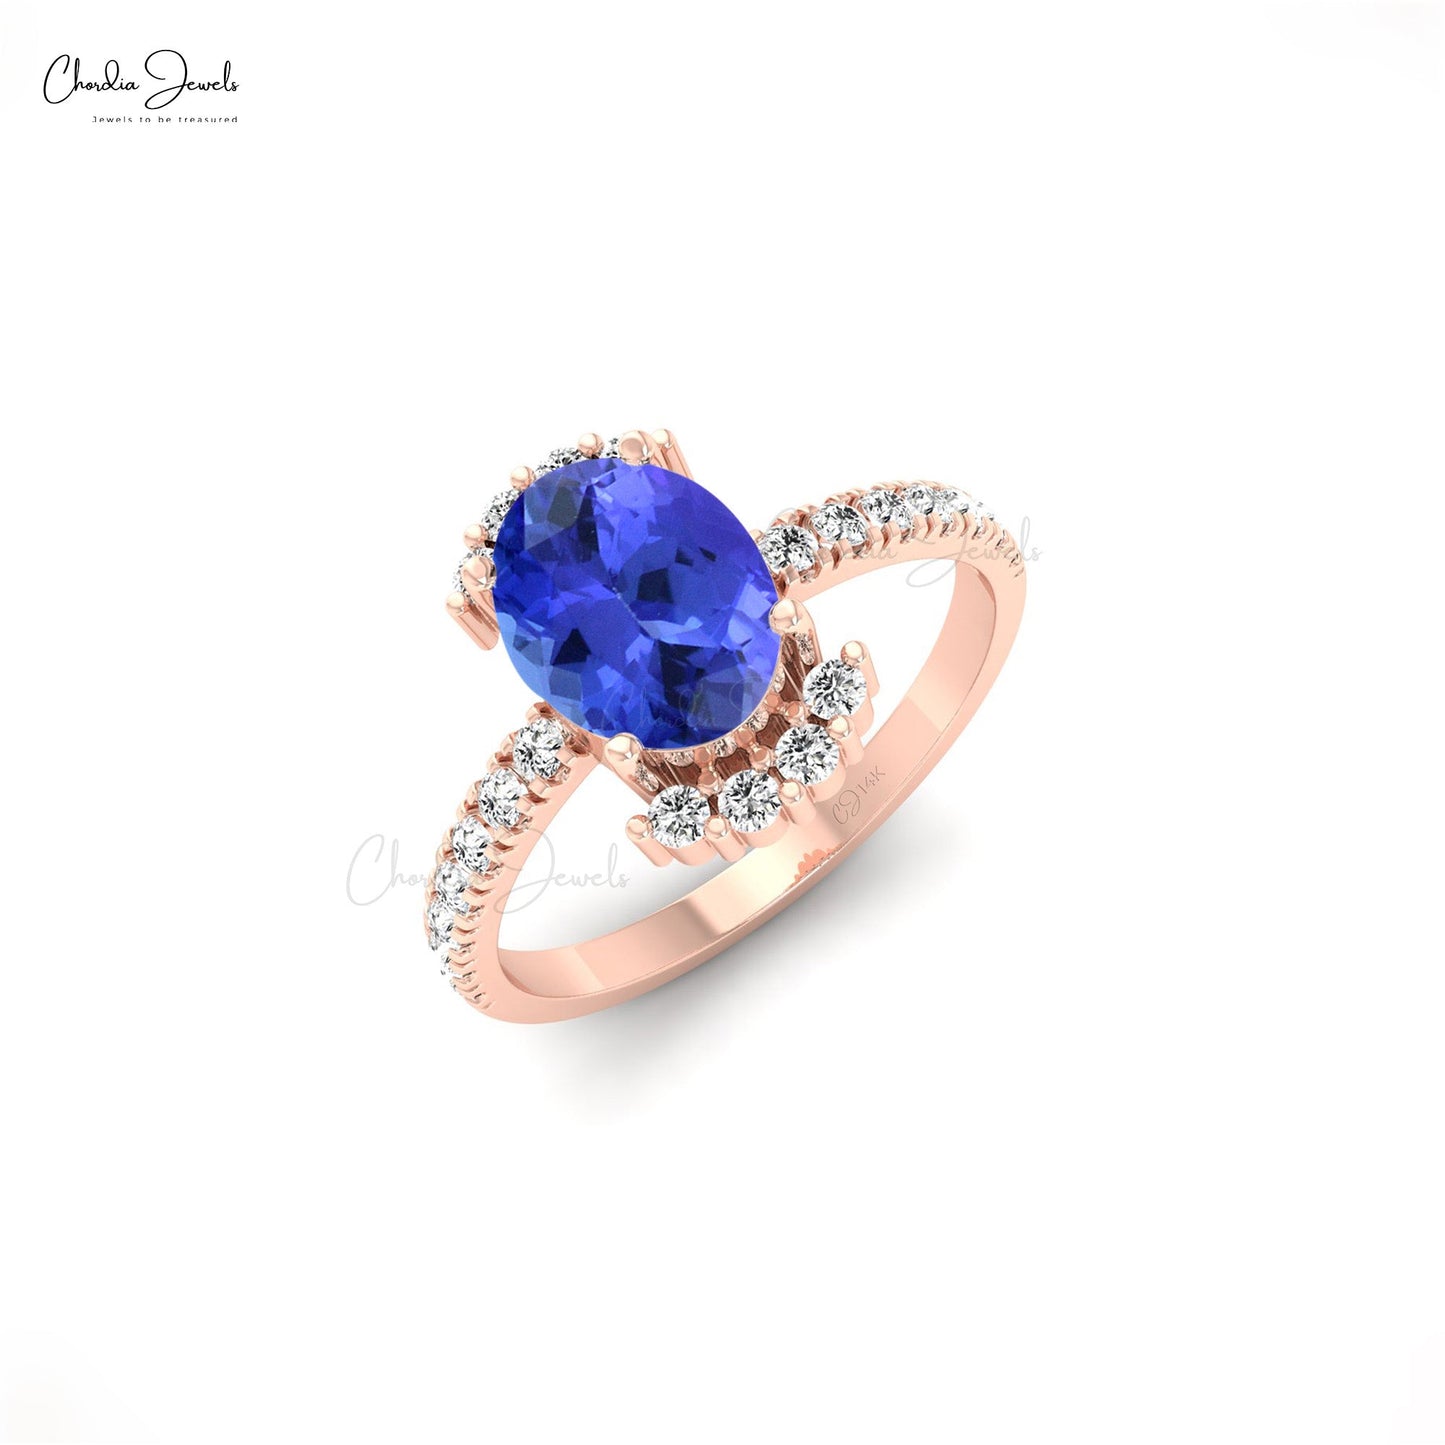 Load image into Gallery viewer, Authentic Diamond Stone Tanzanite Ring In 14k Solid Gold
